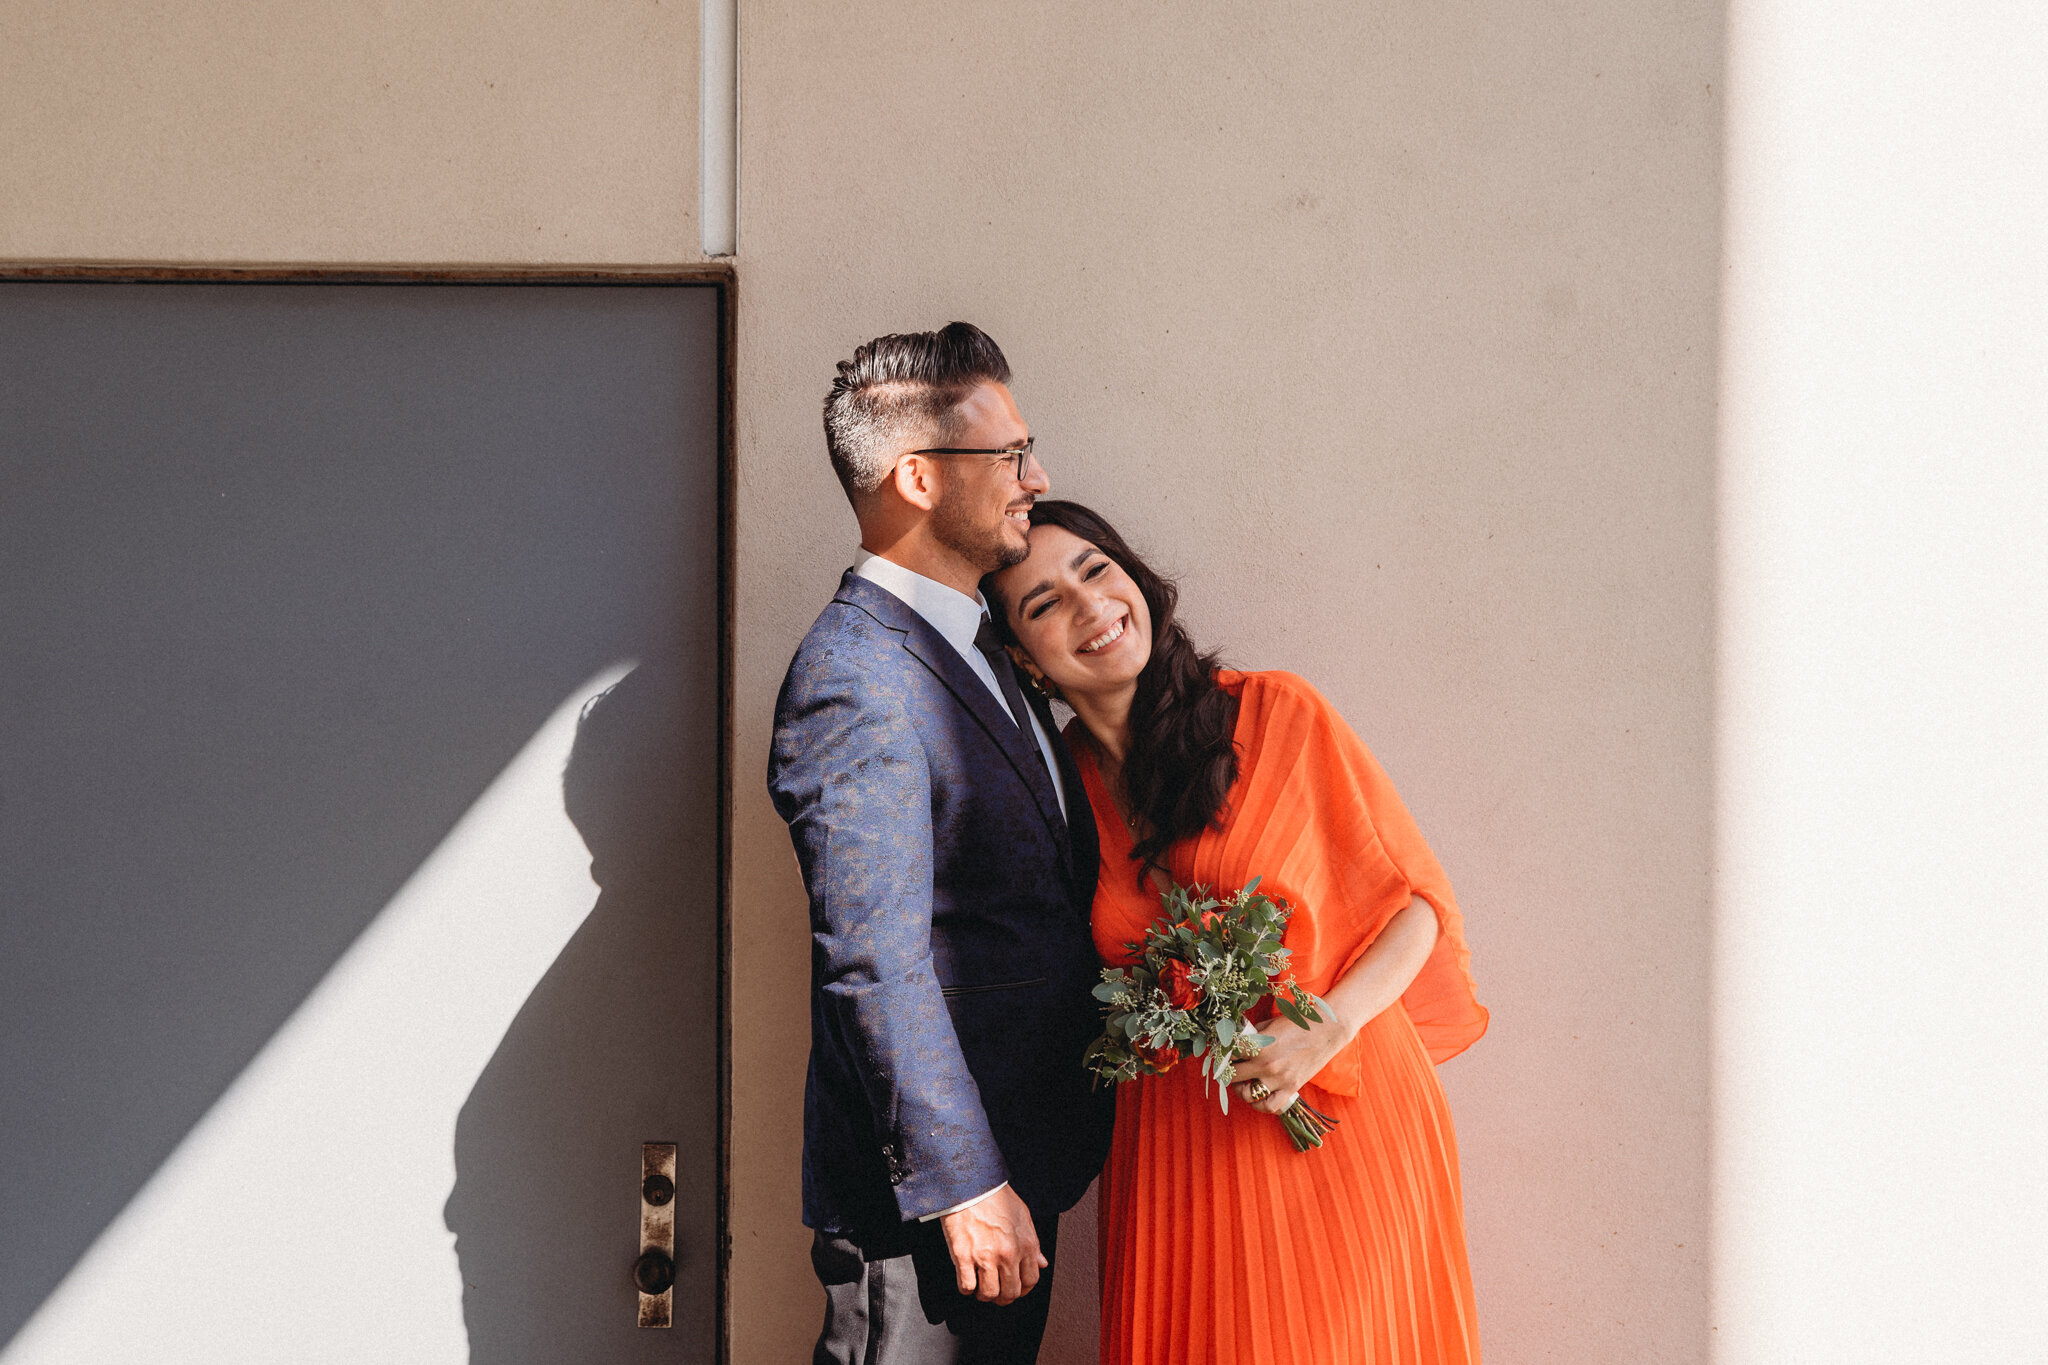 A wedding couple stand in shadow and smile together.